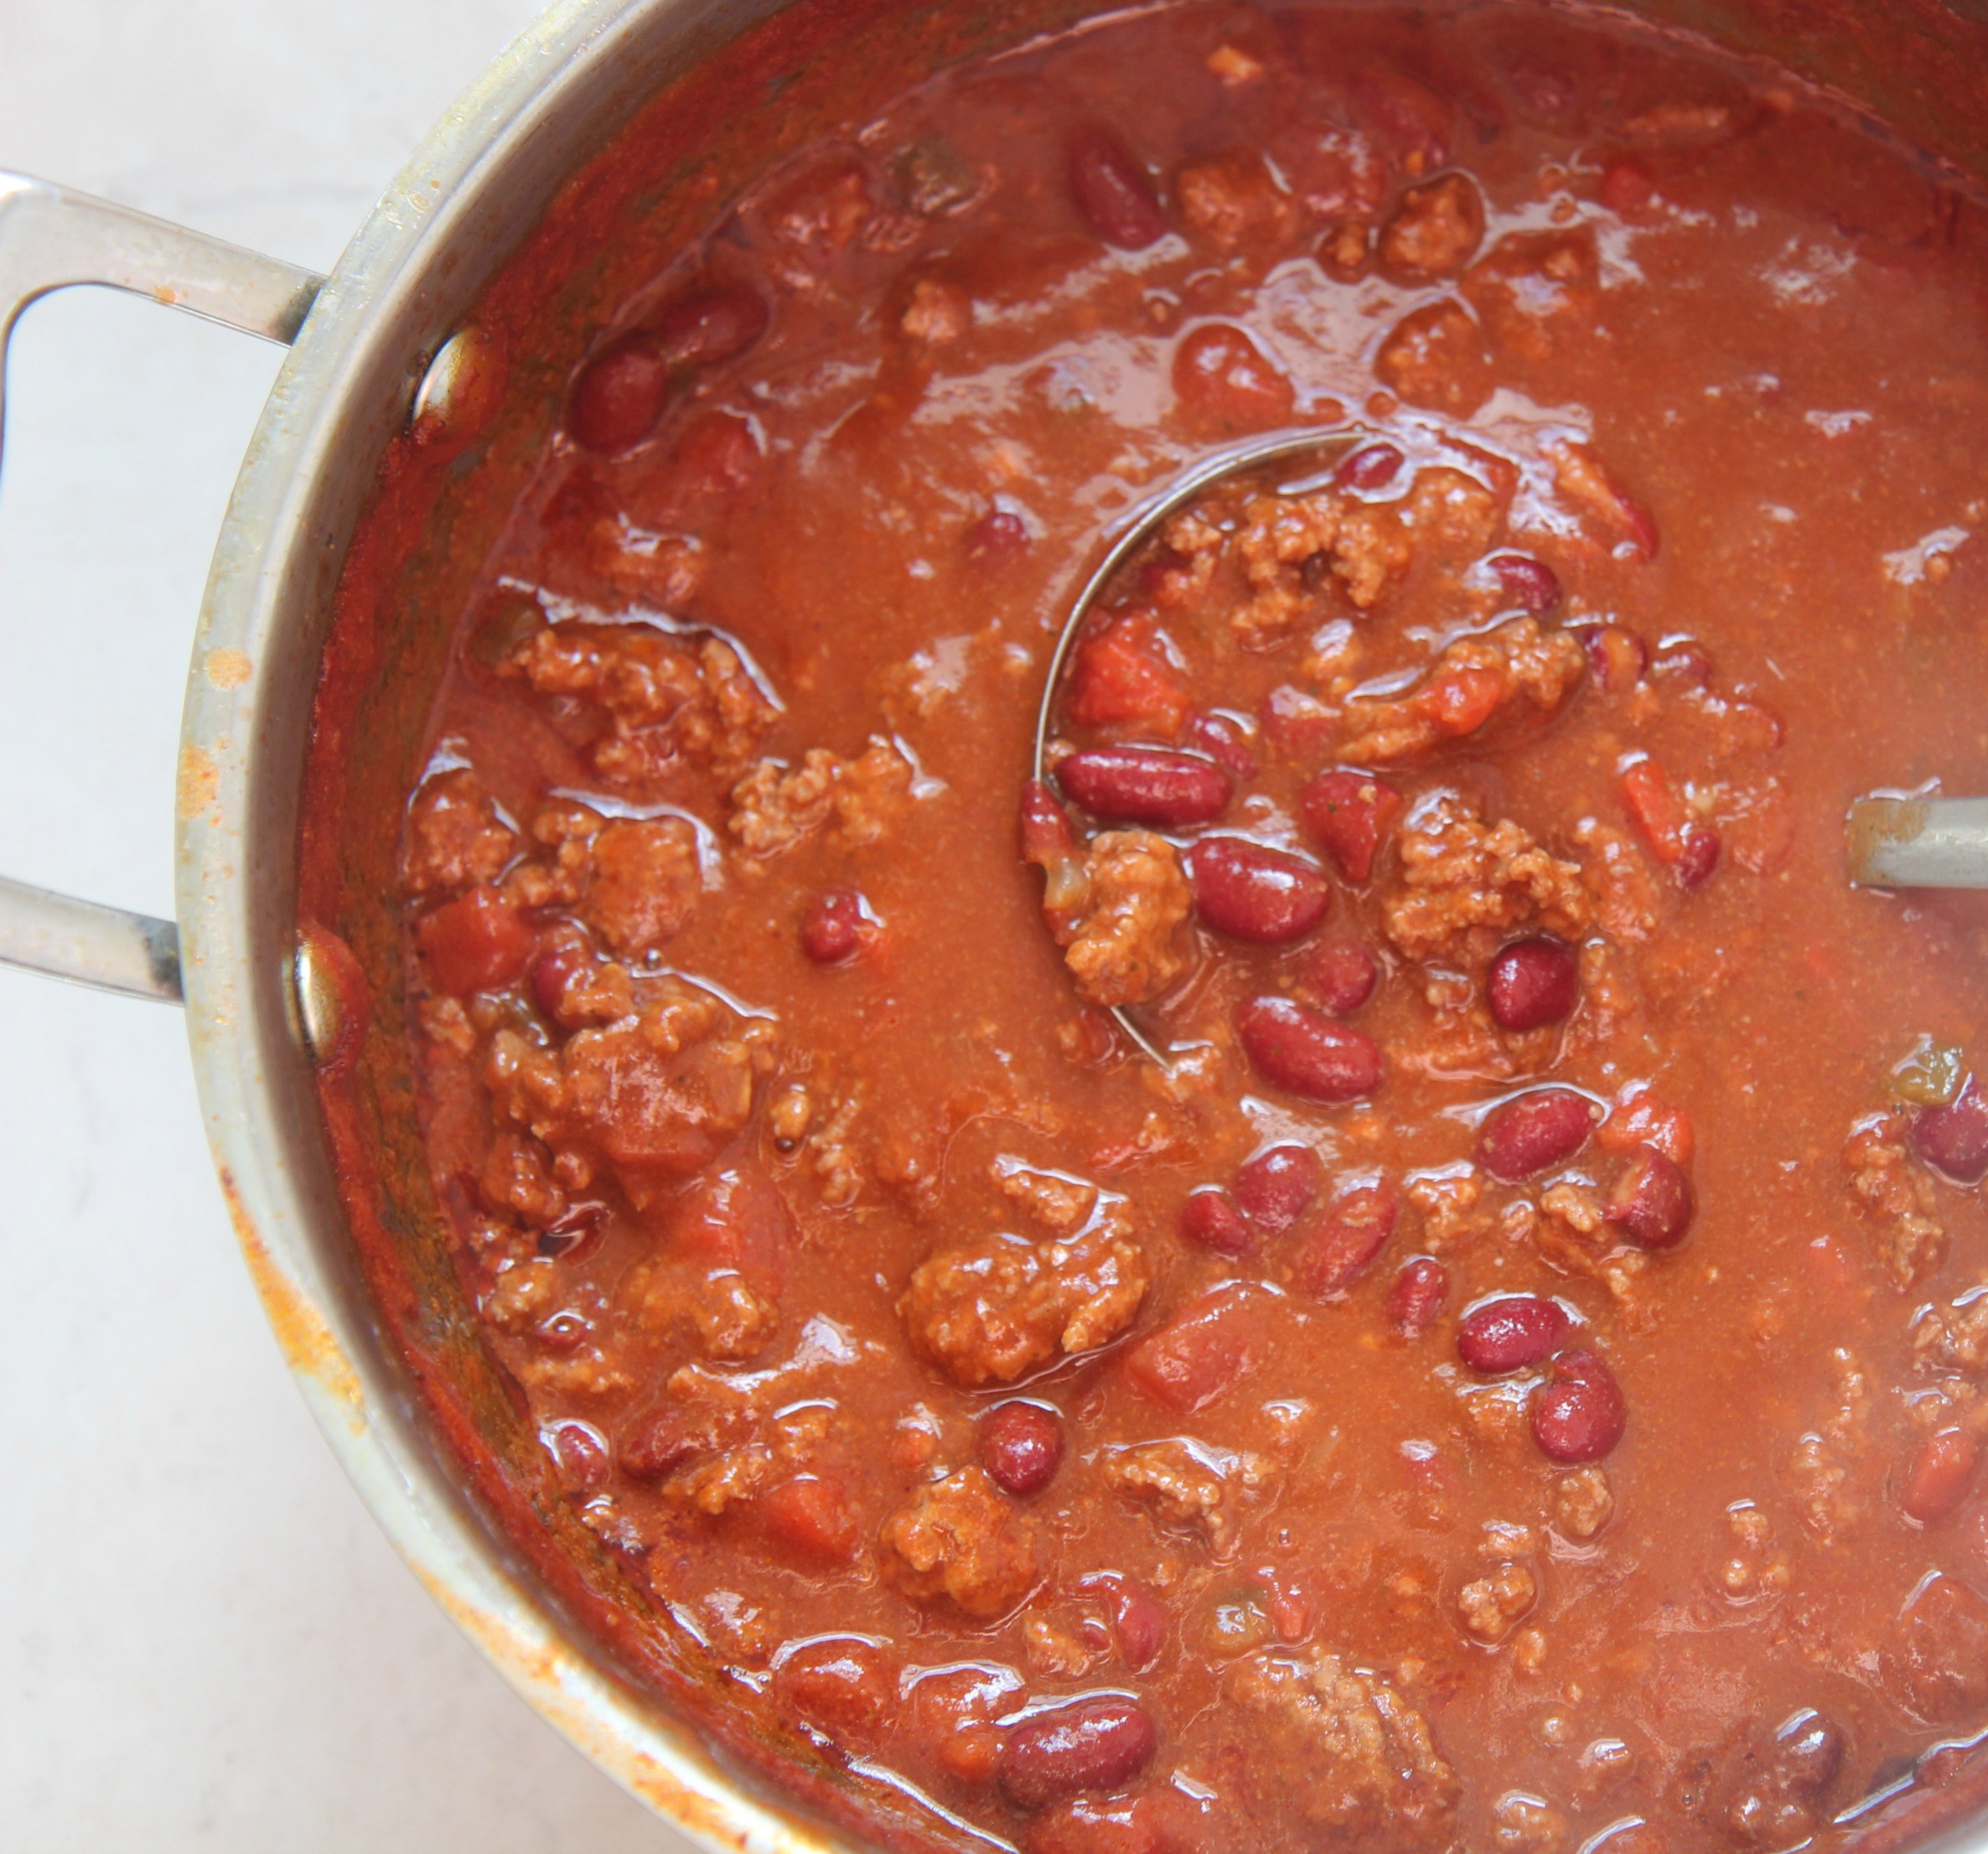 Hearty, rich chili is a delicious cold night comfort meal